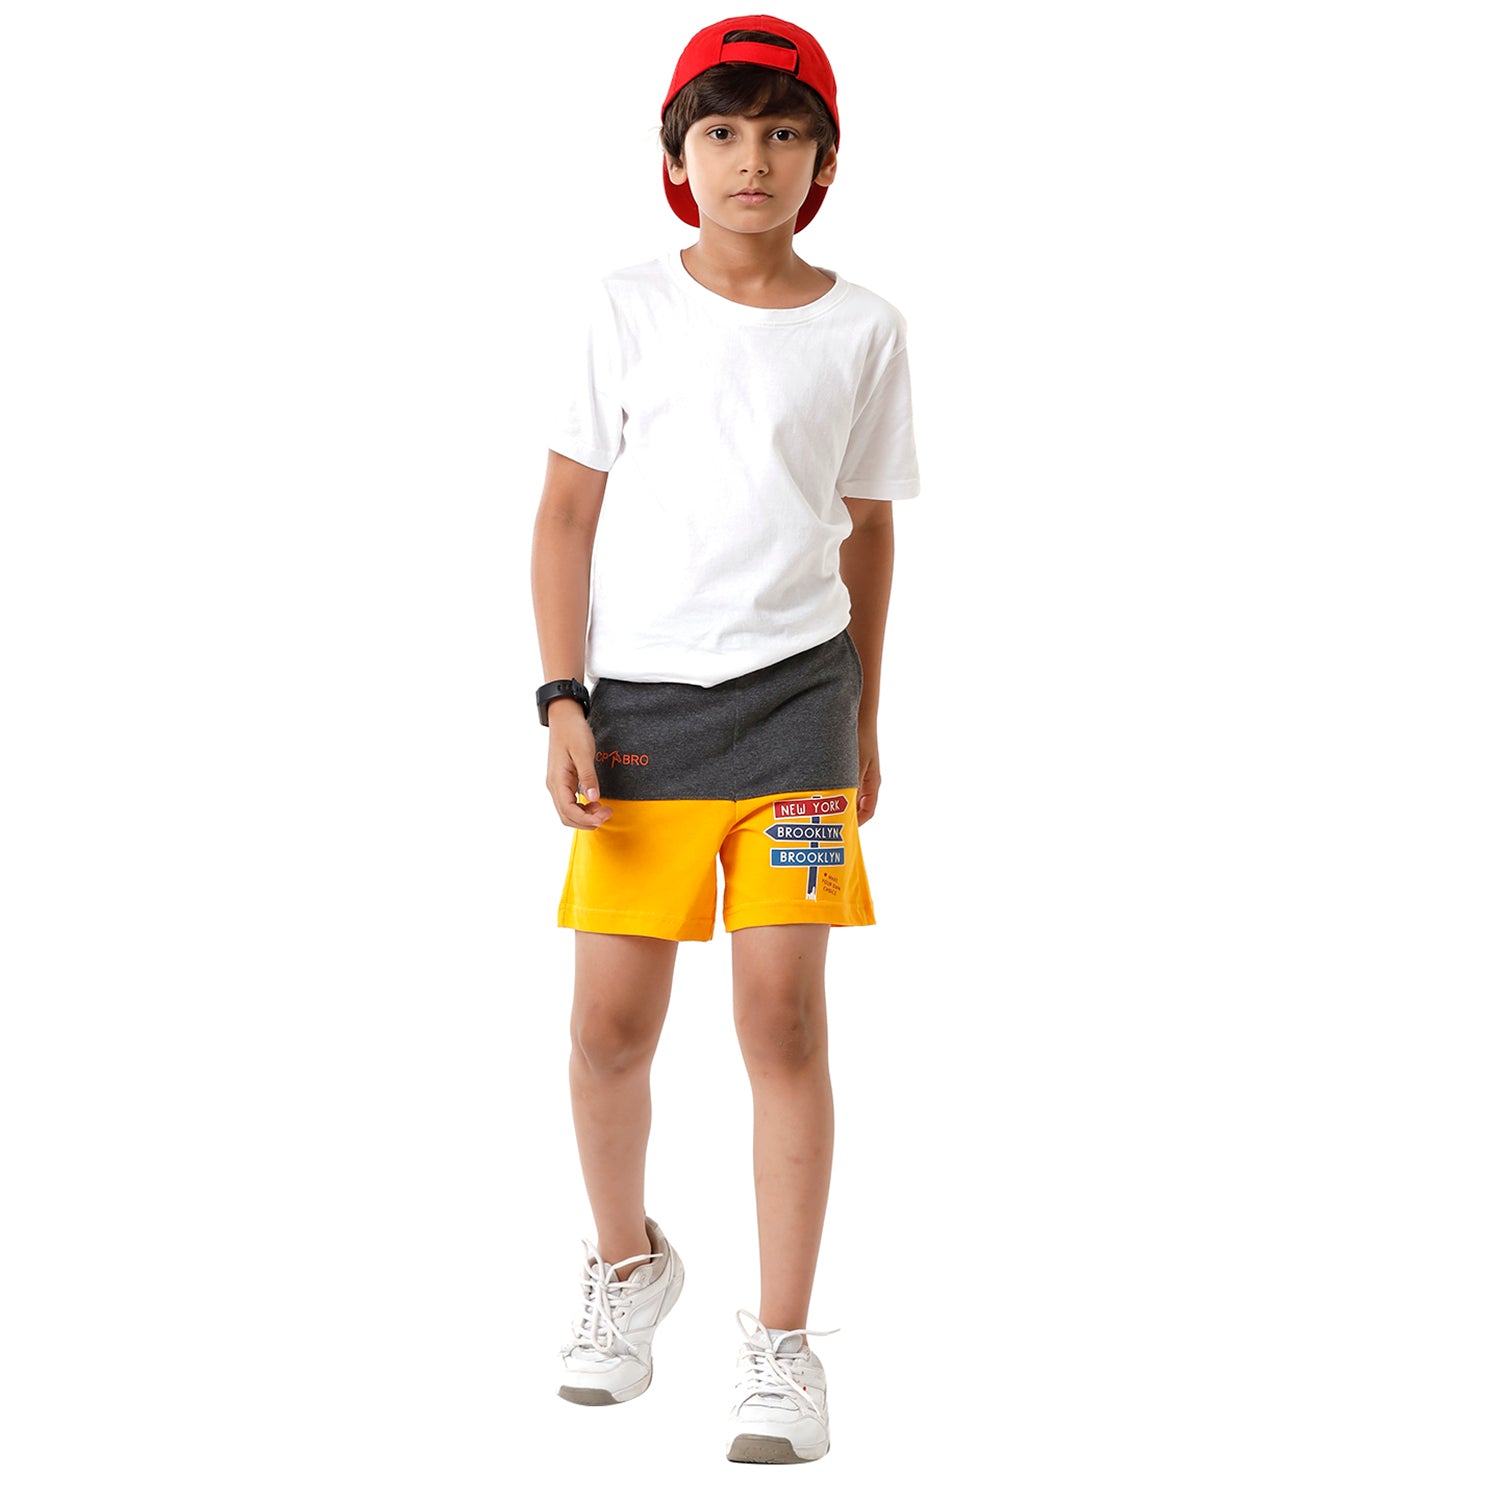 Classic Polo Bro Boys Color Block Slim Fit Grey with Yellow Color Cotton Shorts - BBTS 02 B Shorts Classic Polo 